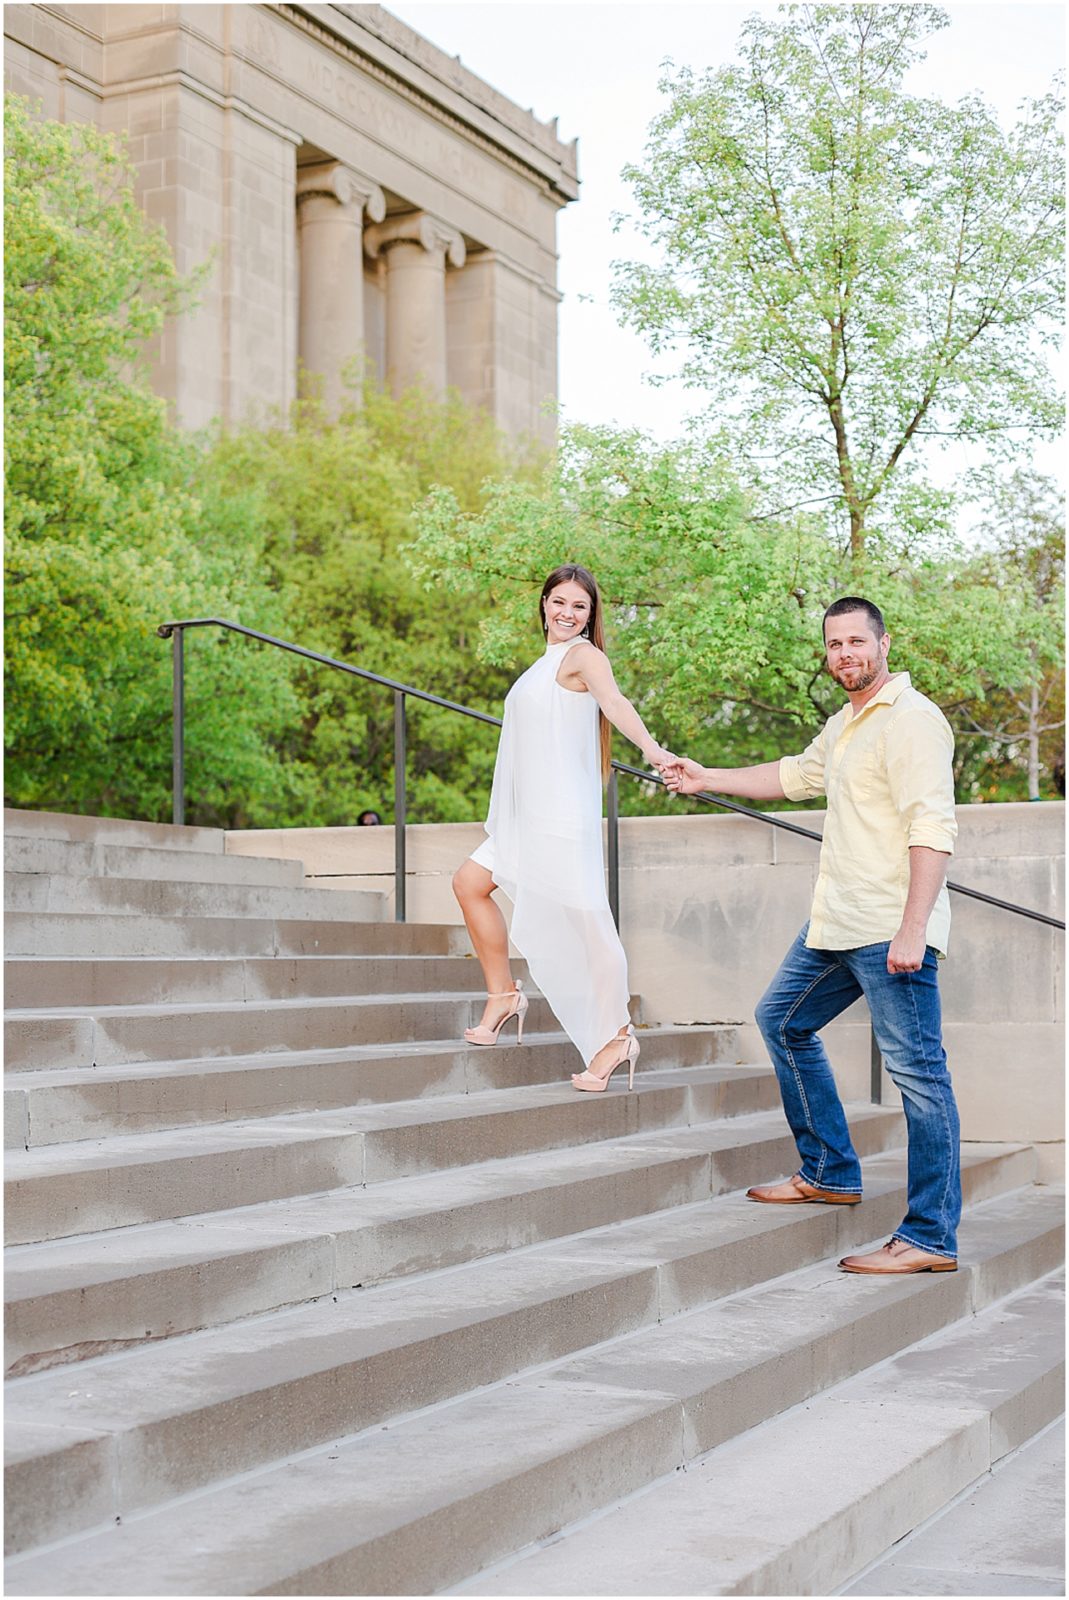 walking up the stairs for their engagement photos at kansas city nelson atkins museum